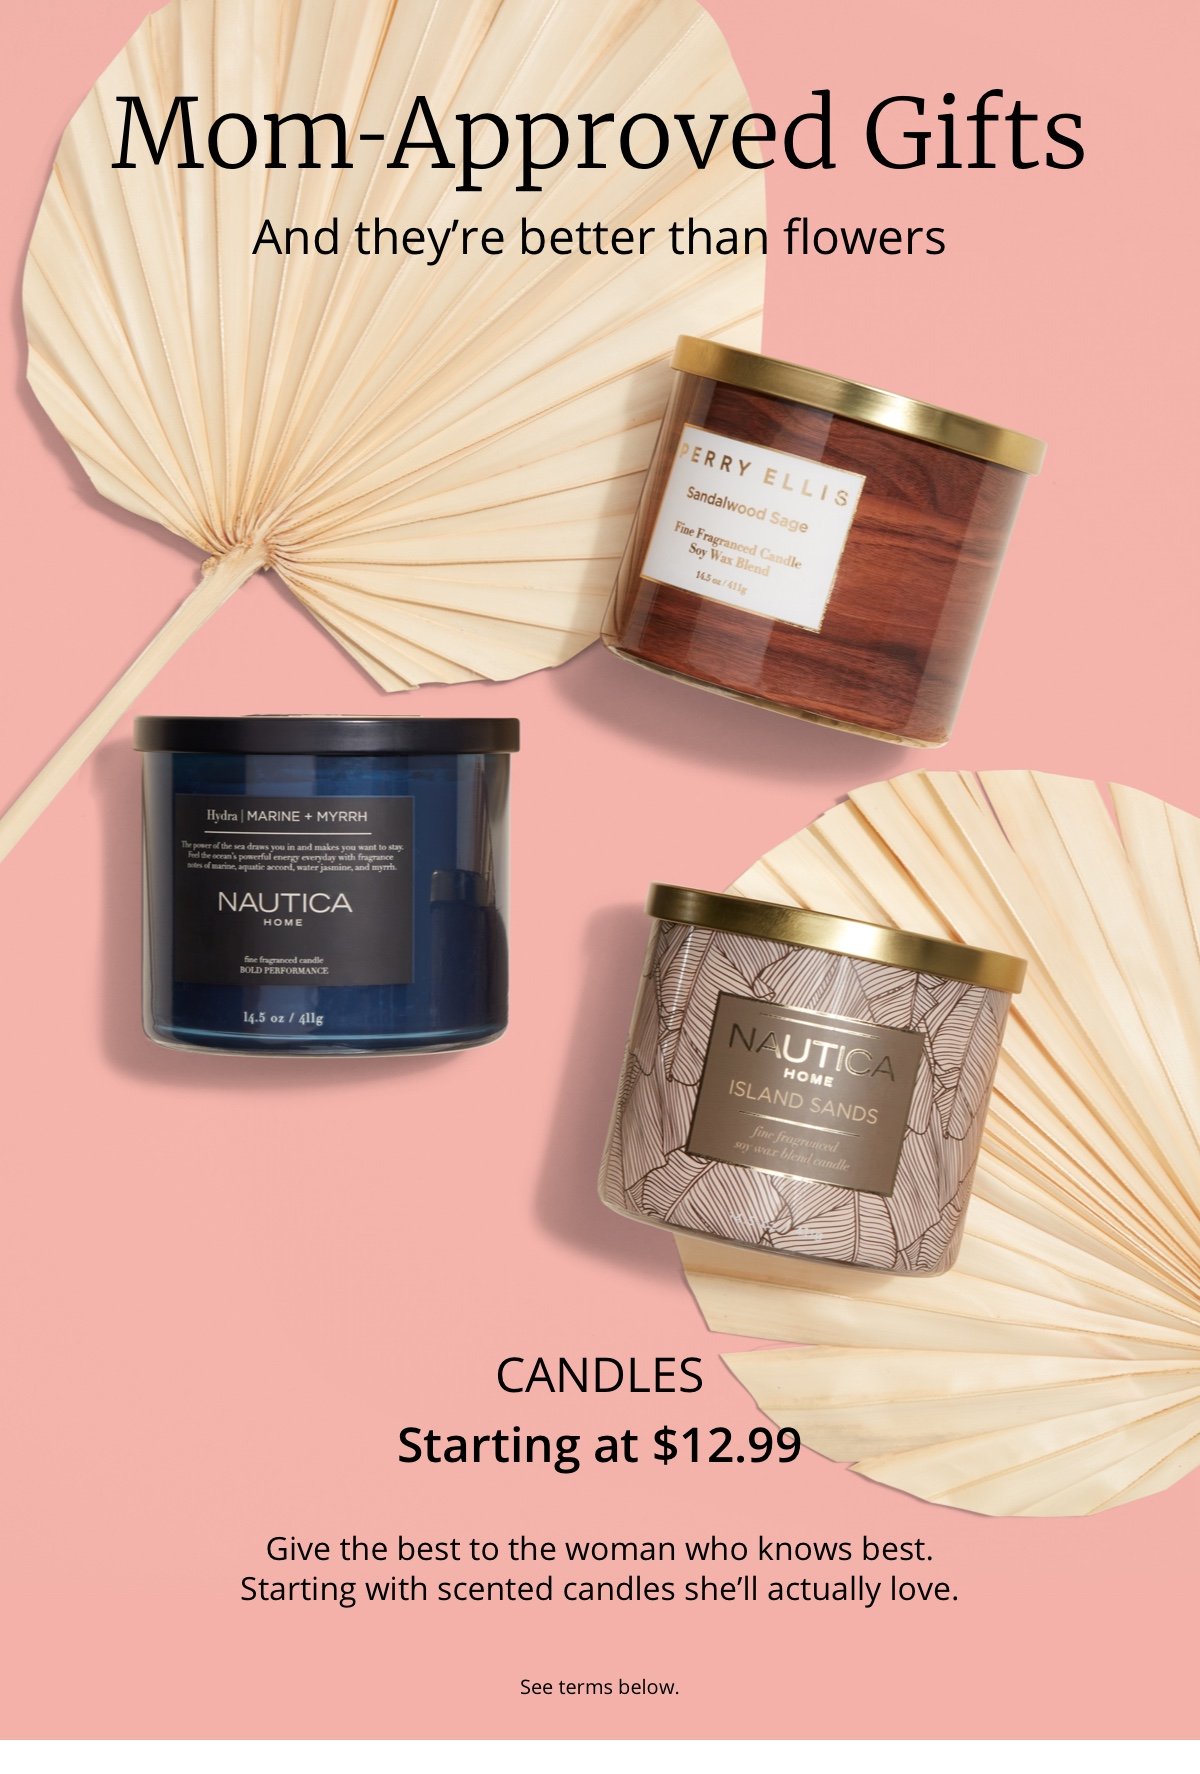 Mom-Approved Gifts|And they’re better than flowers|Candles|Starting at \\$12.99|Give the best to the woman who knows best.| Starting with scented candles she’ll actually love.|See terms below.